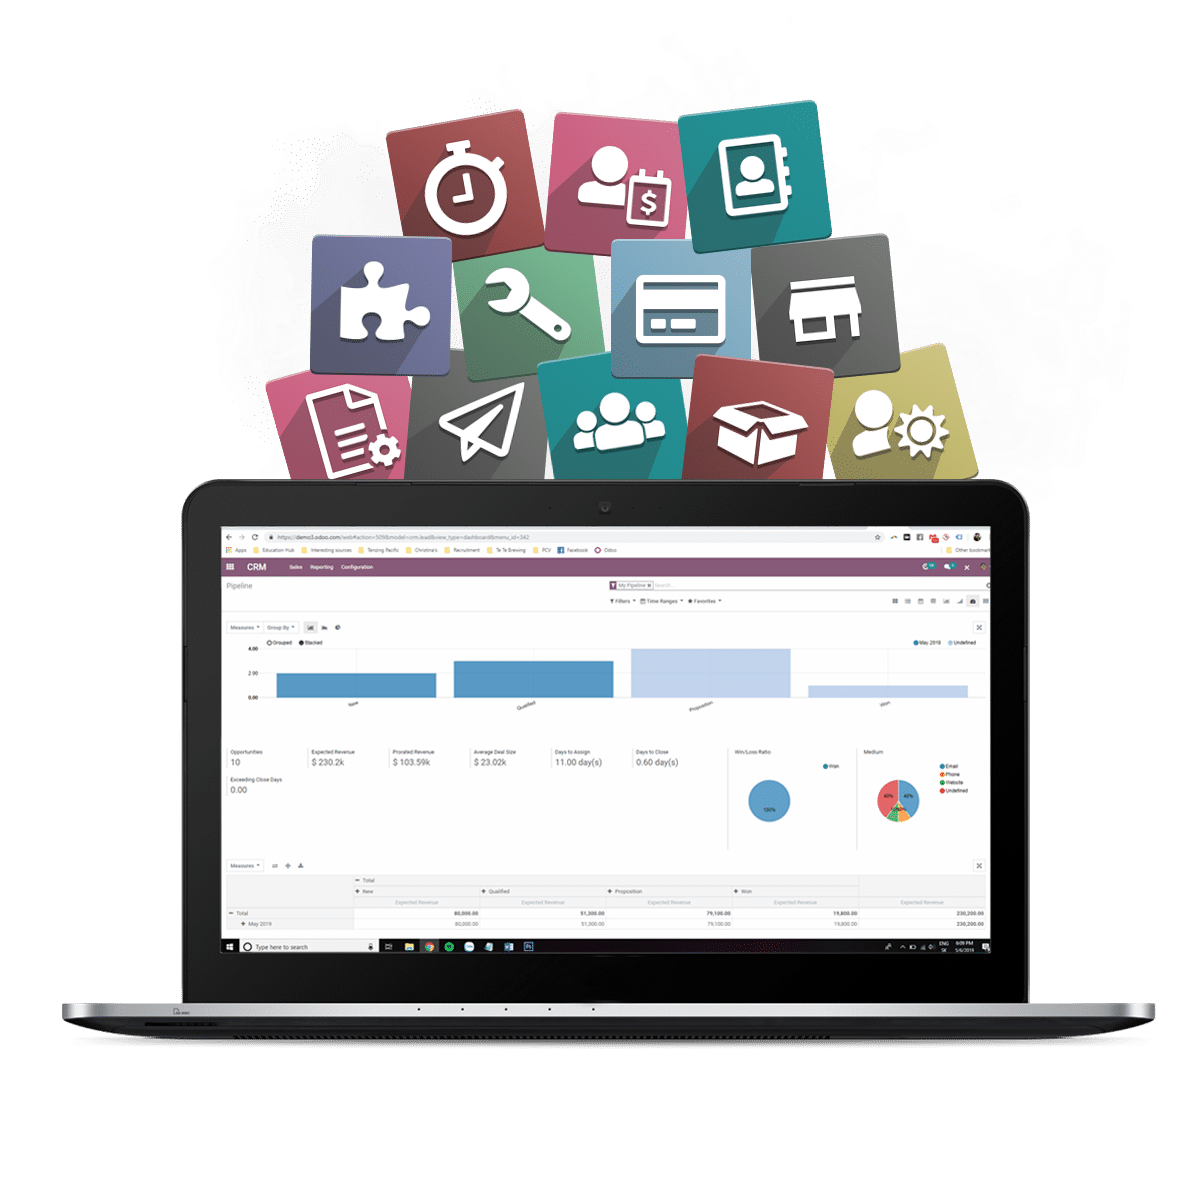 odoo features and apps